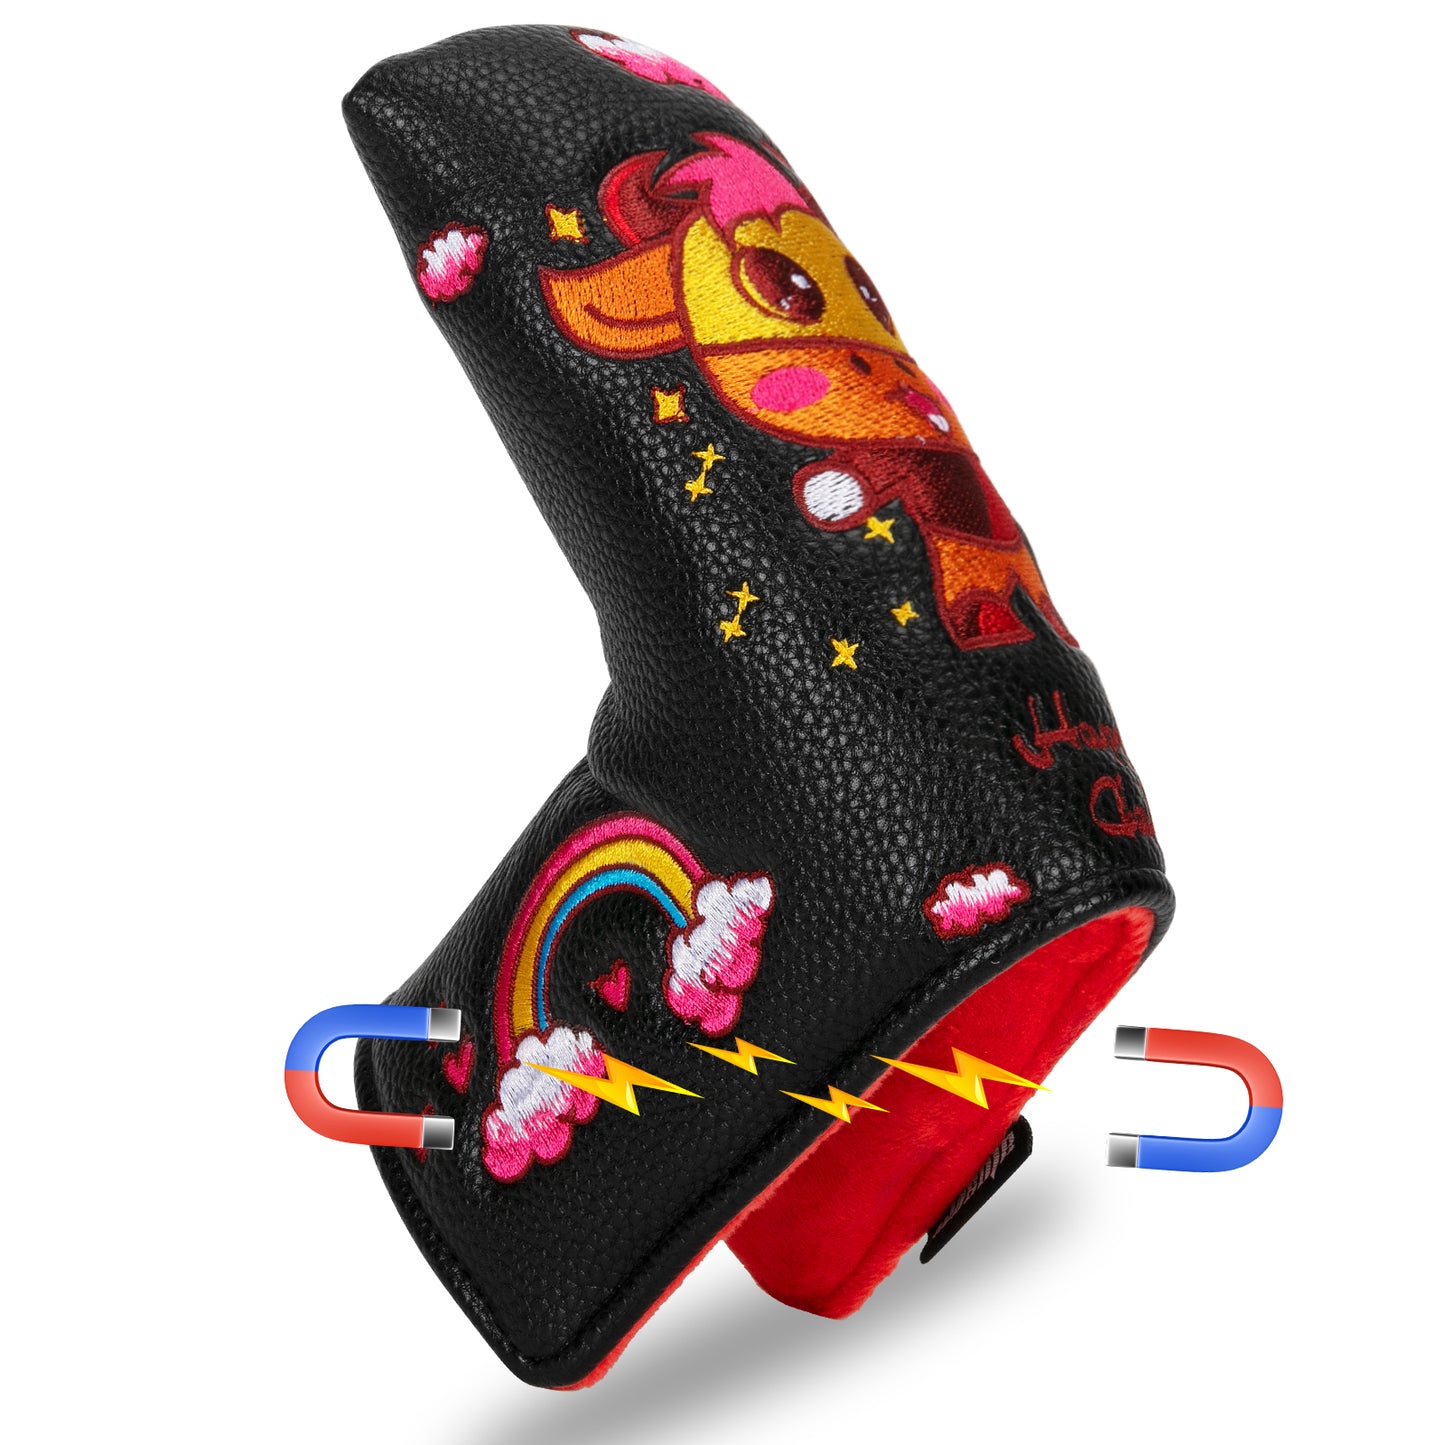 Golf Blade Putter Cover Headcover Magnetic Synthetic Leather Closure Embroidery Funny Patterns Soft for Women and Men Fit Most Brands Protector Black White Color